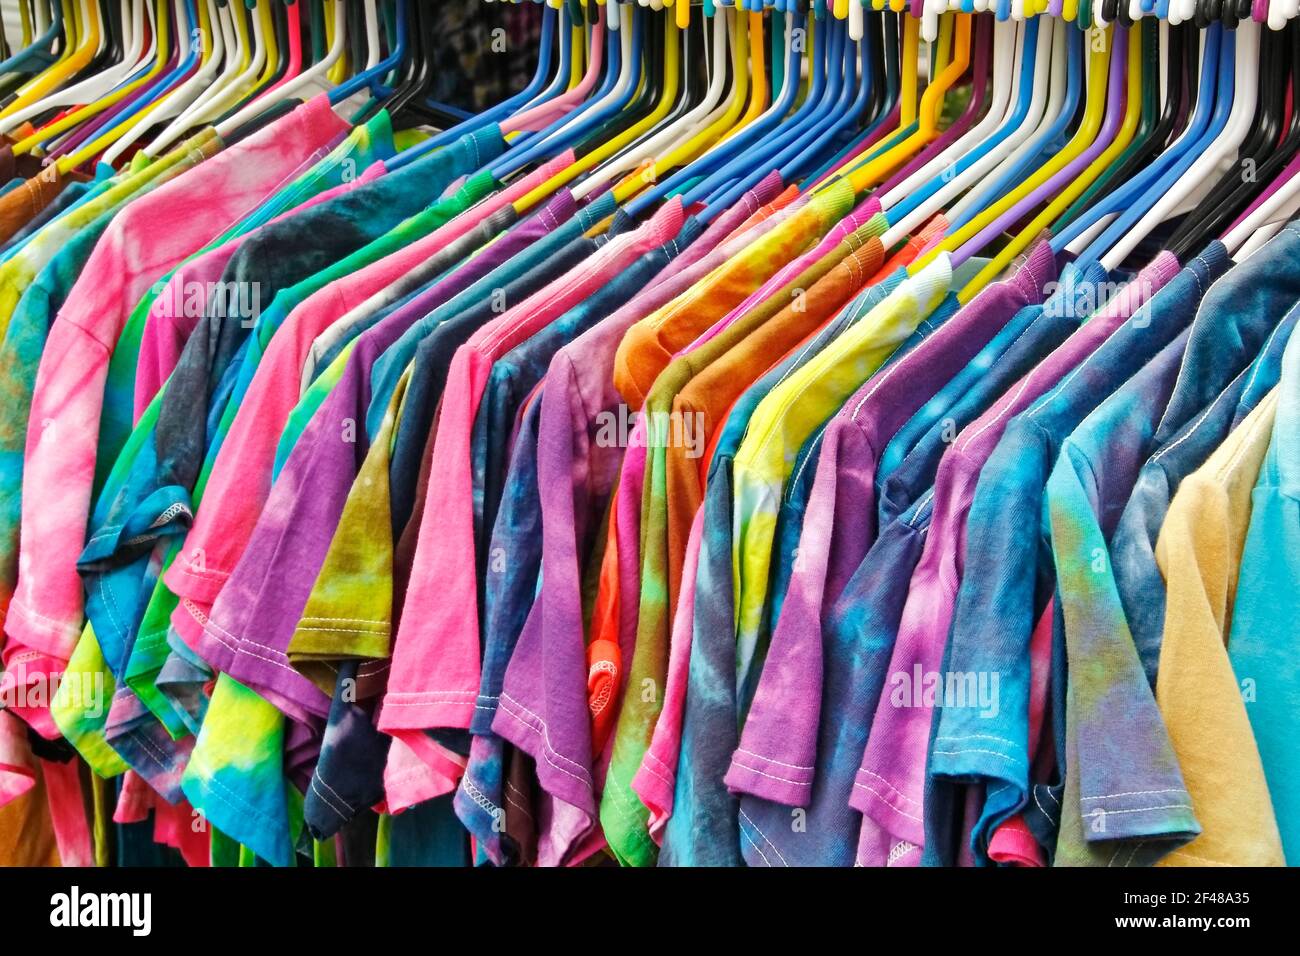 Horizontal sideview of a rack of vibrantly colored tie dyed t-shirts on colored plastic hangers lined up and hanging in a row. Stock Photo